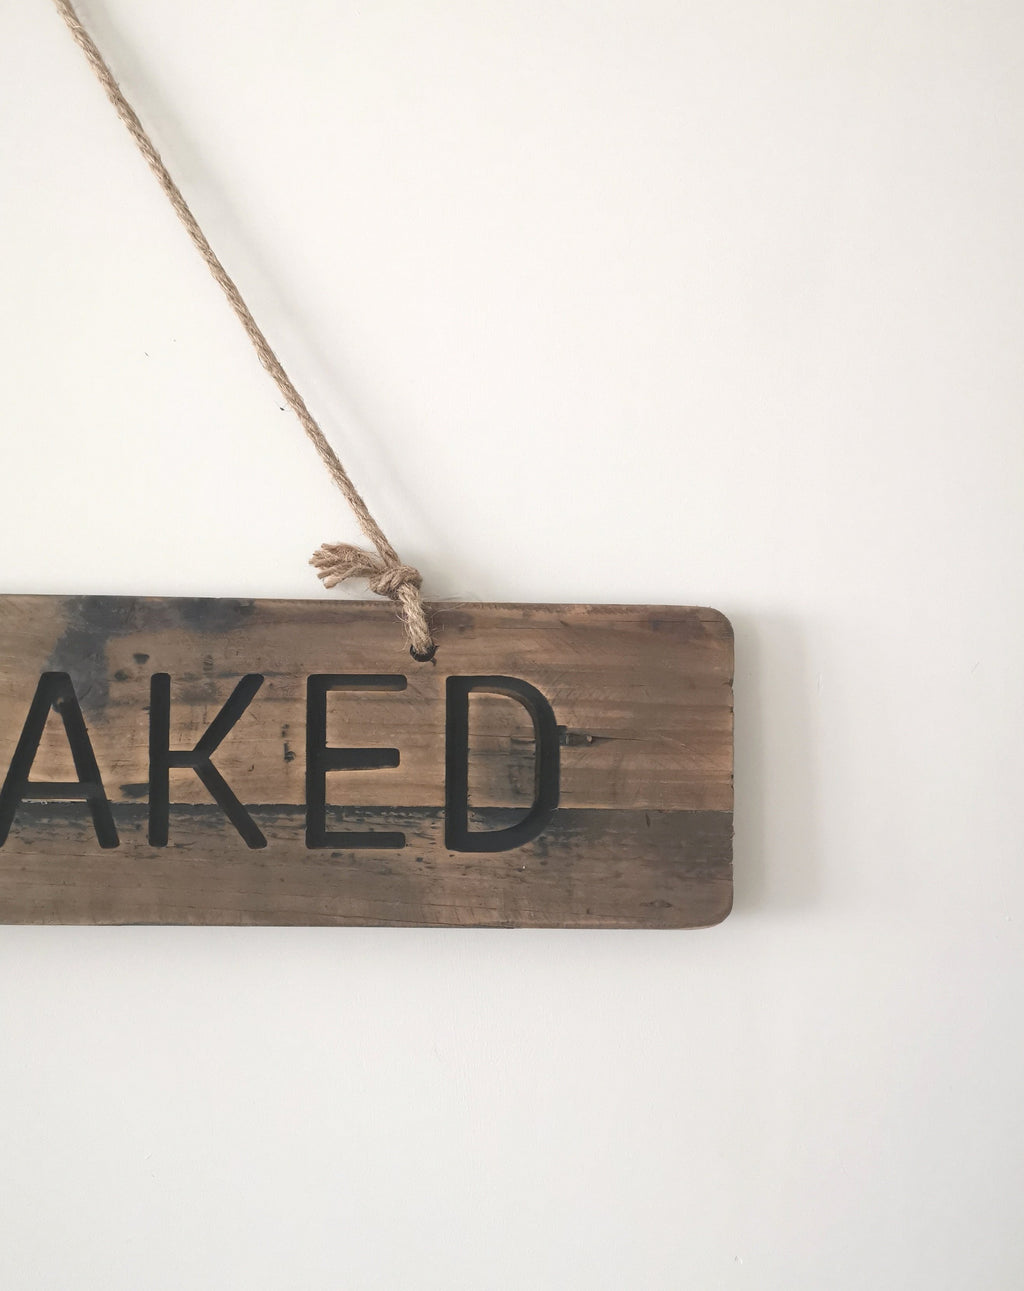 Rustic Get Naked sign with Rope - The Burrow Interiors